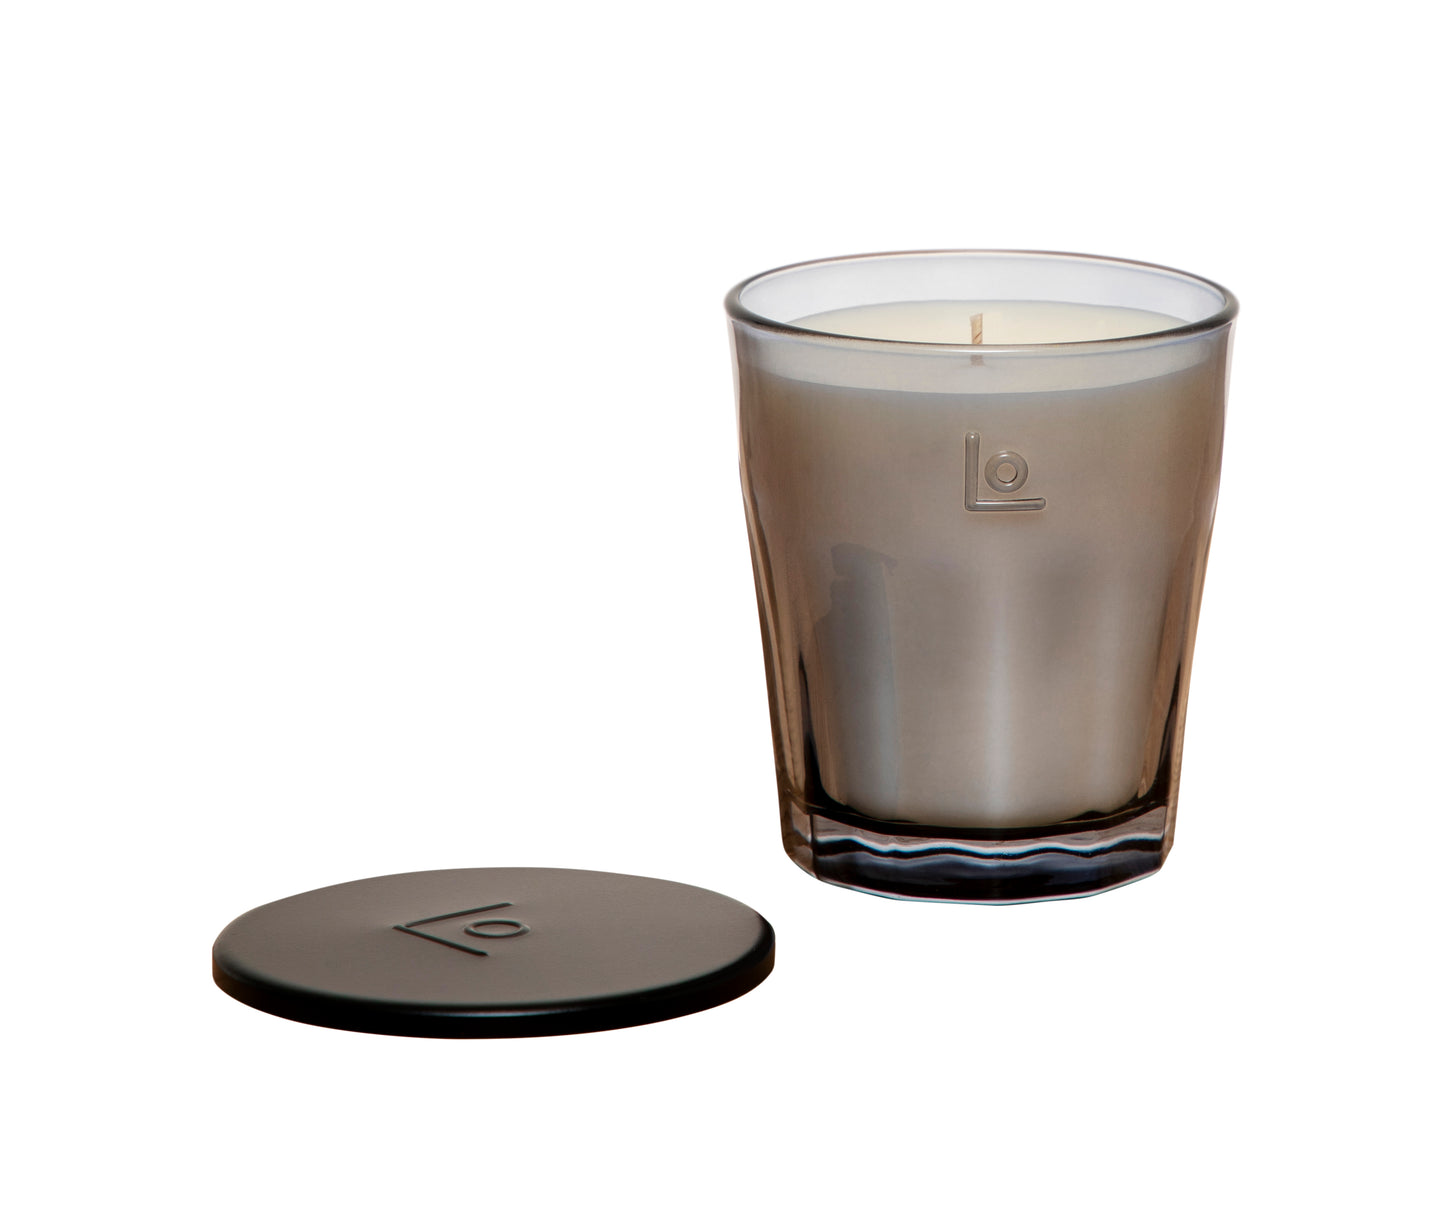 LO. Studio Being Little 220g Scented Candle